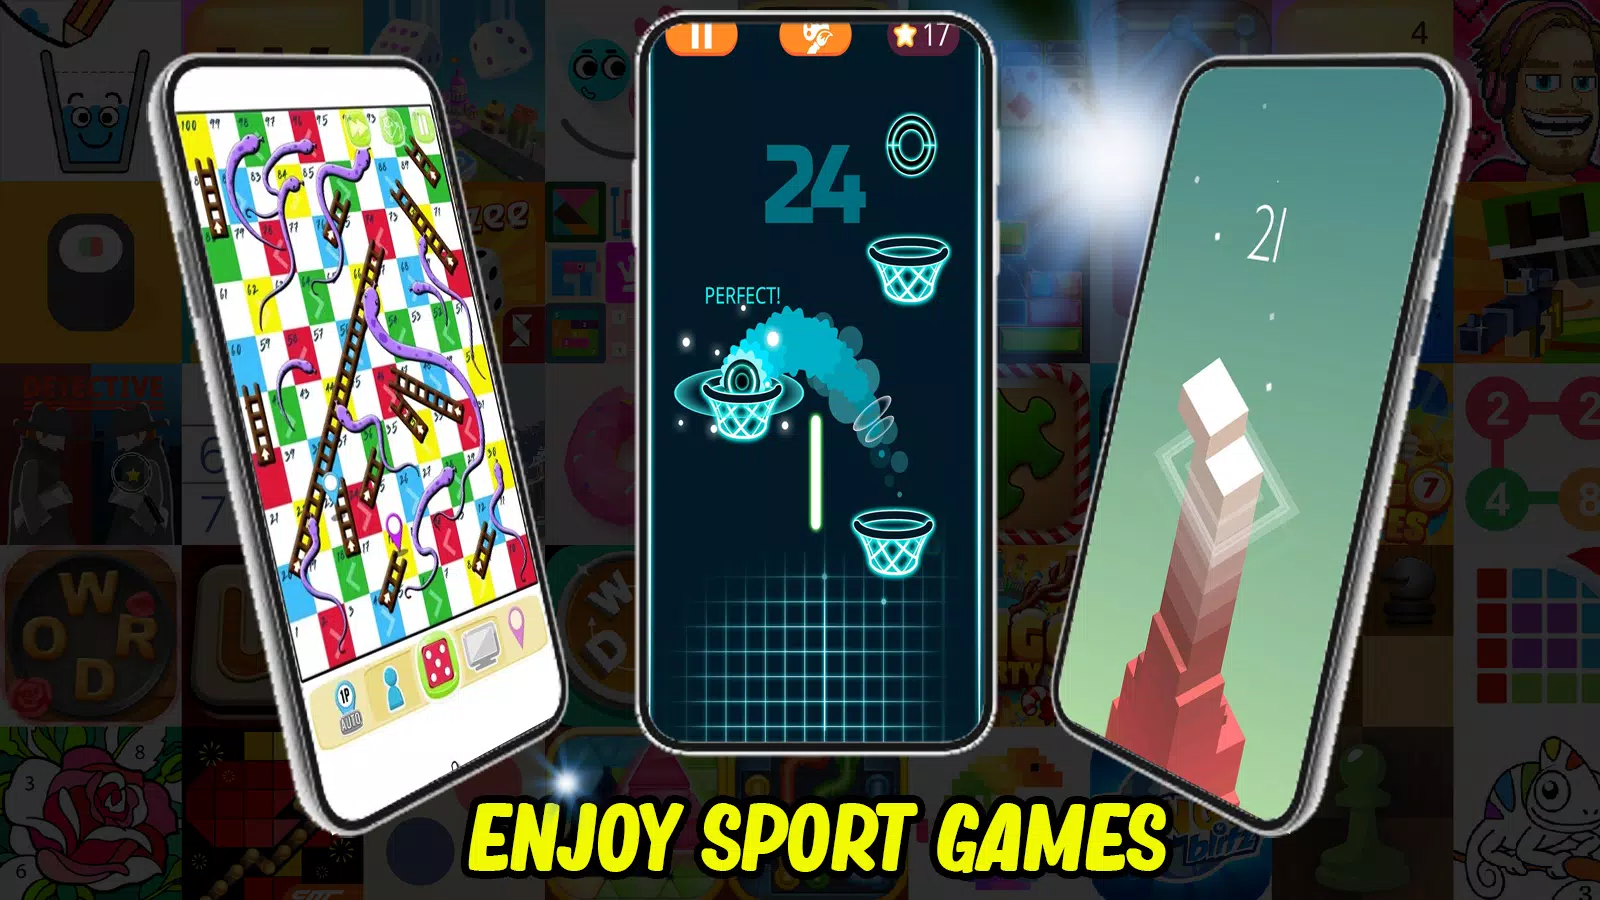 Download 2 3 4 Player Mini Games latest 4.1.8 Android APK